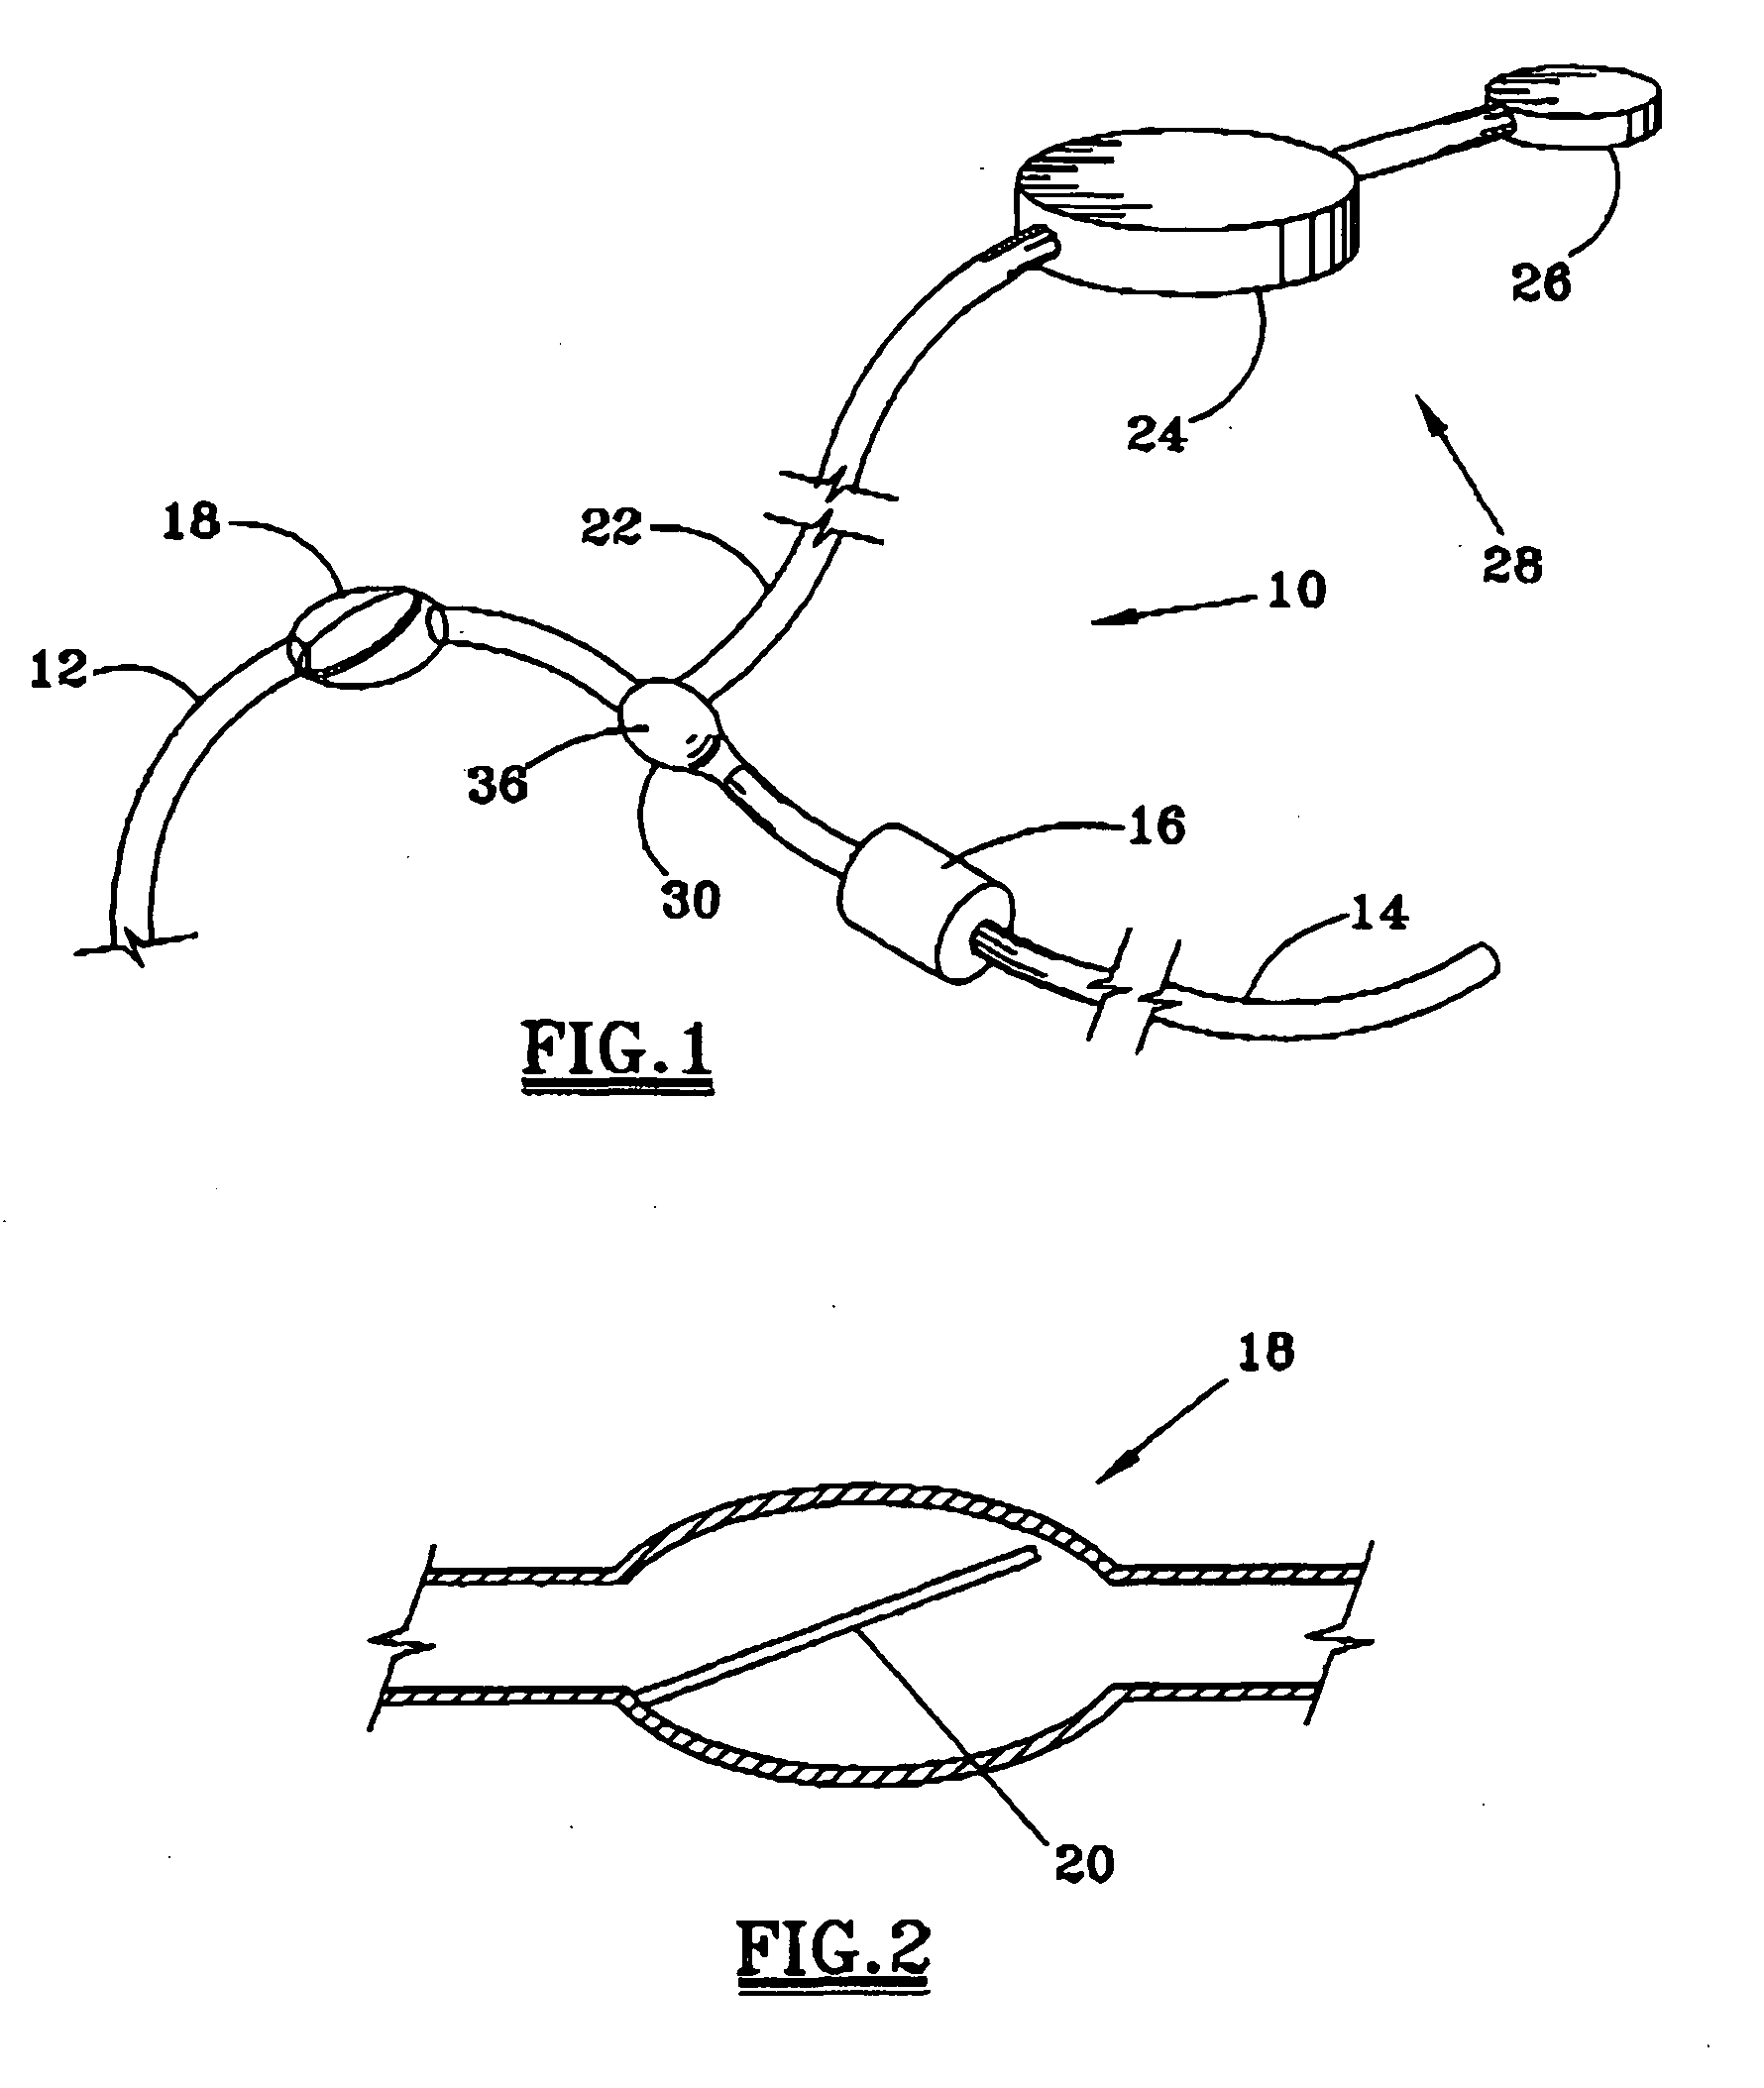 Implantable shunt system and method